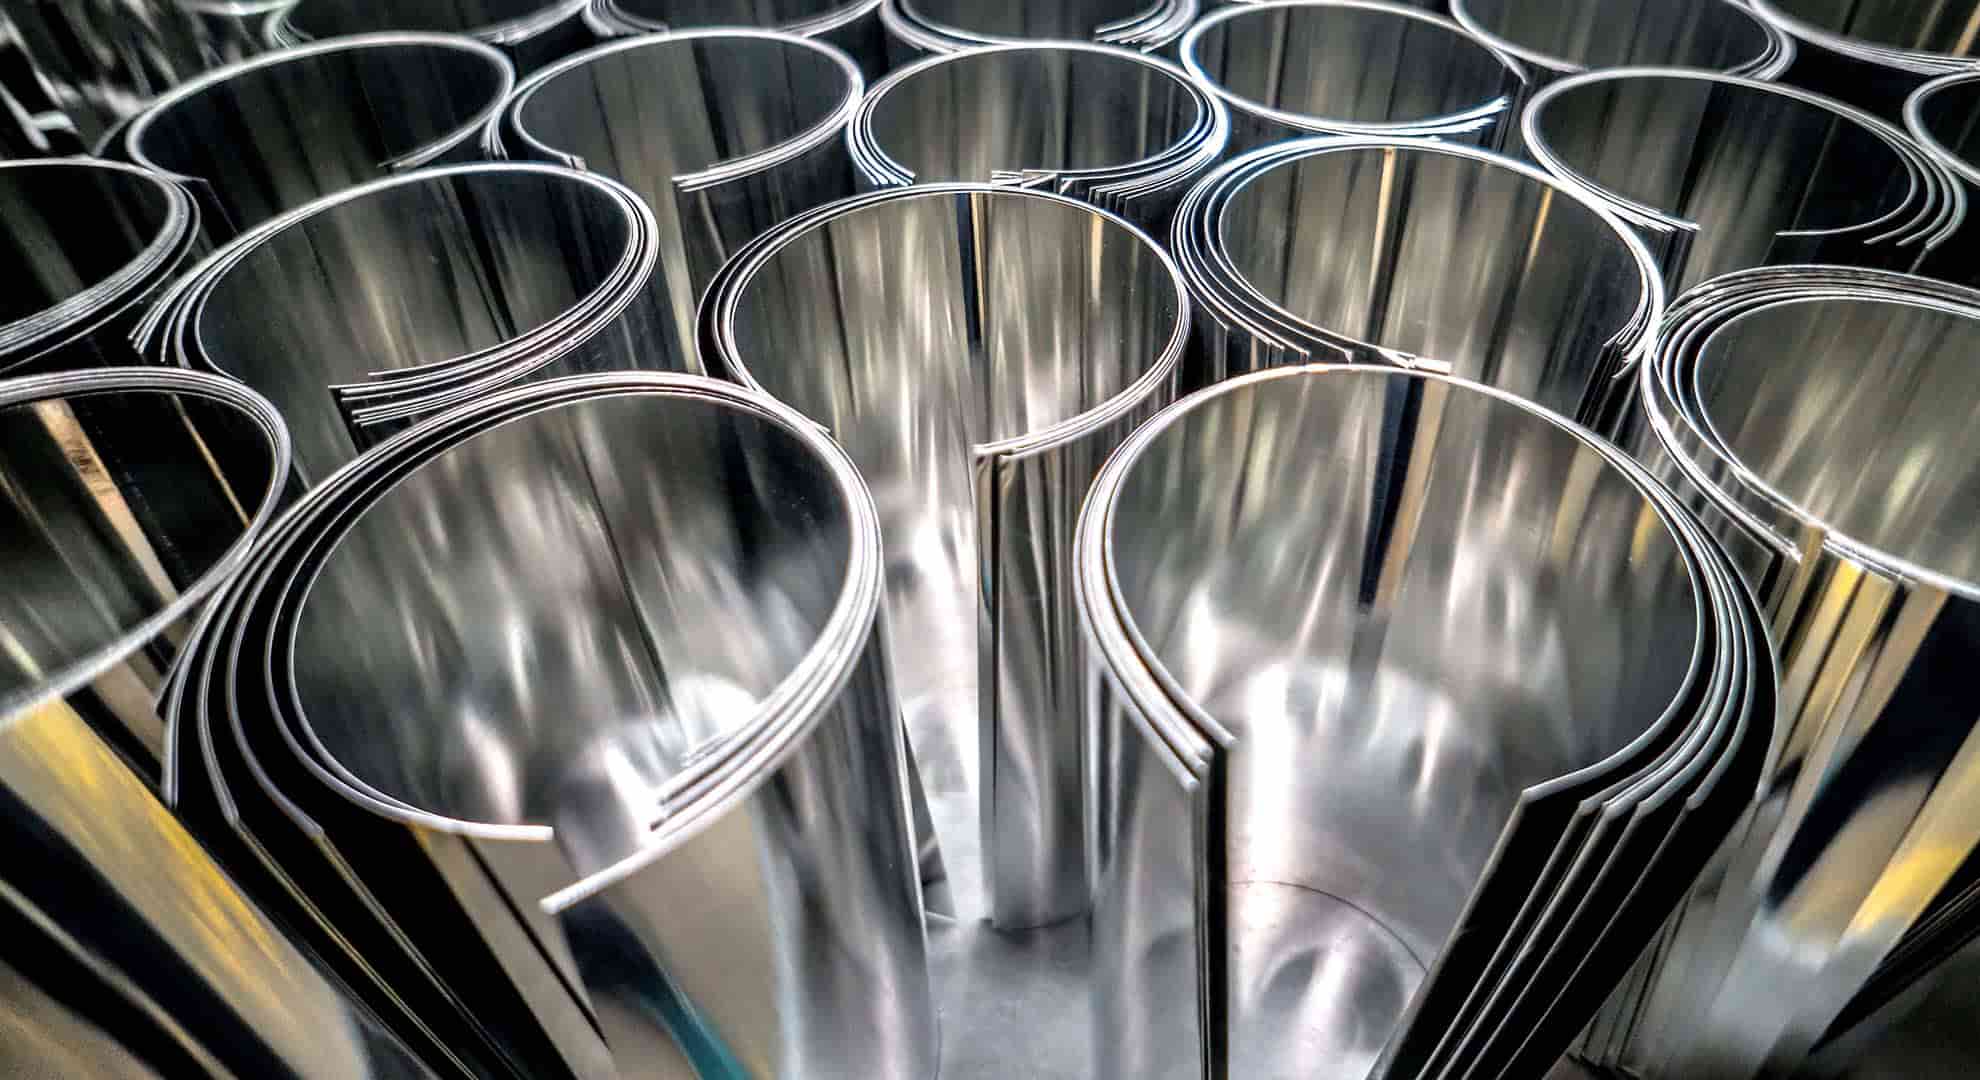 Sheets of metal at a factory to be used to manufacture cans